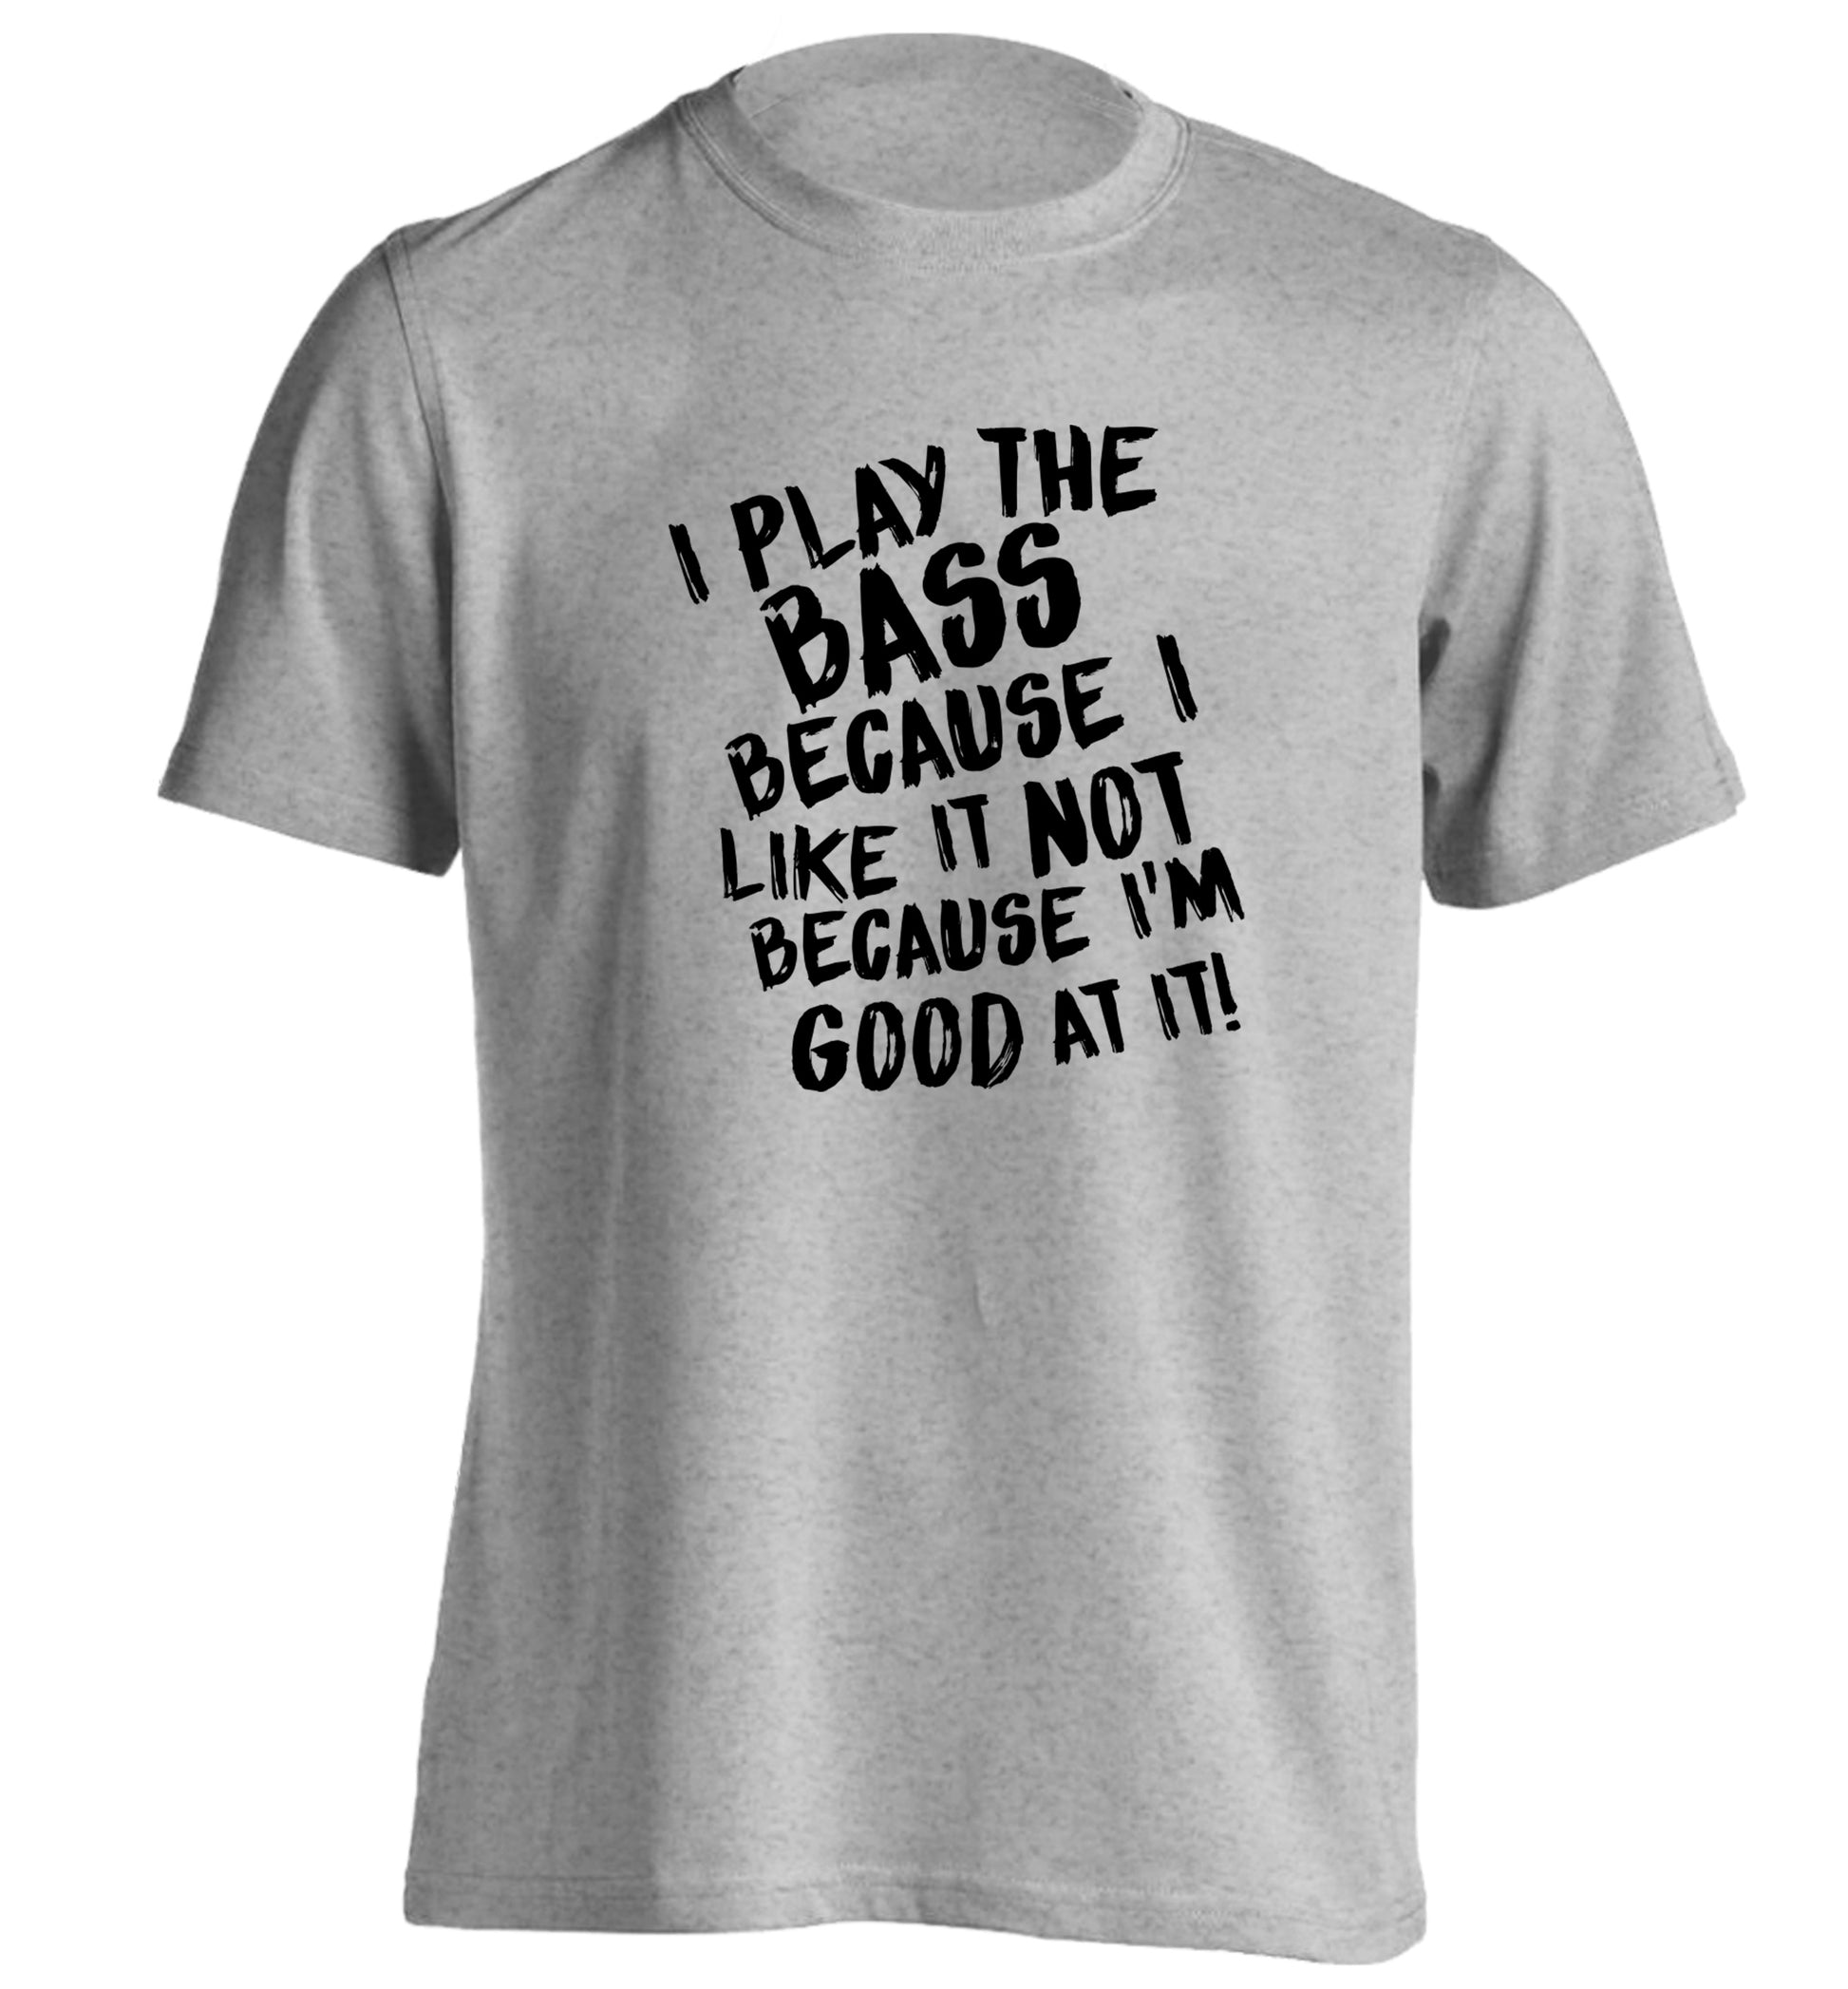 I play the bass because I like it not because I'm good at it adults unisex grey Tshirt 2XL